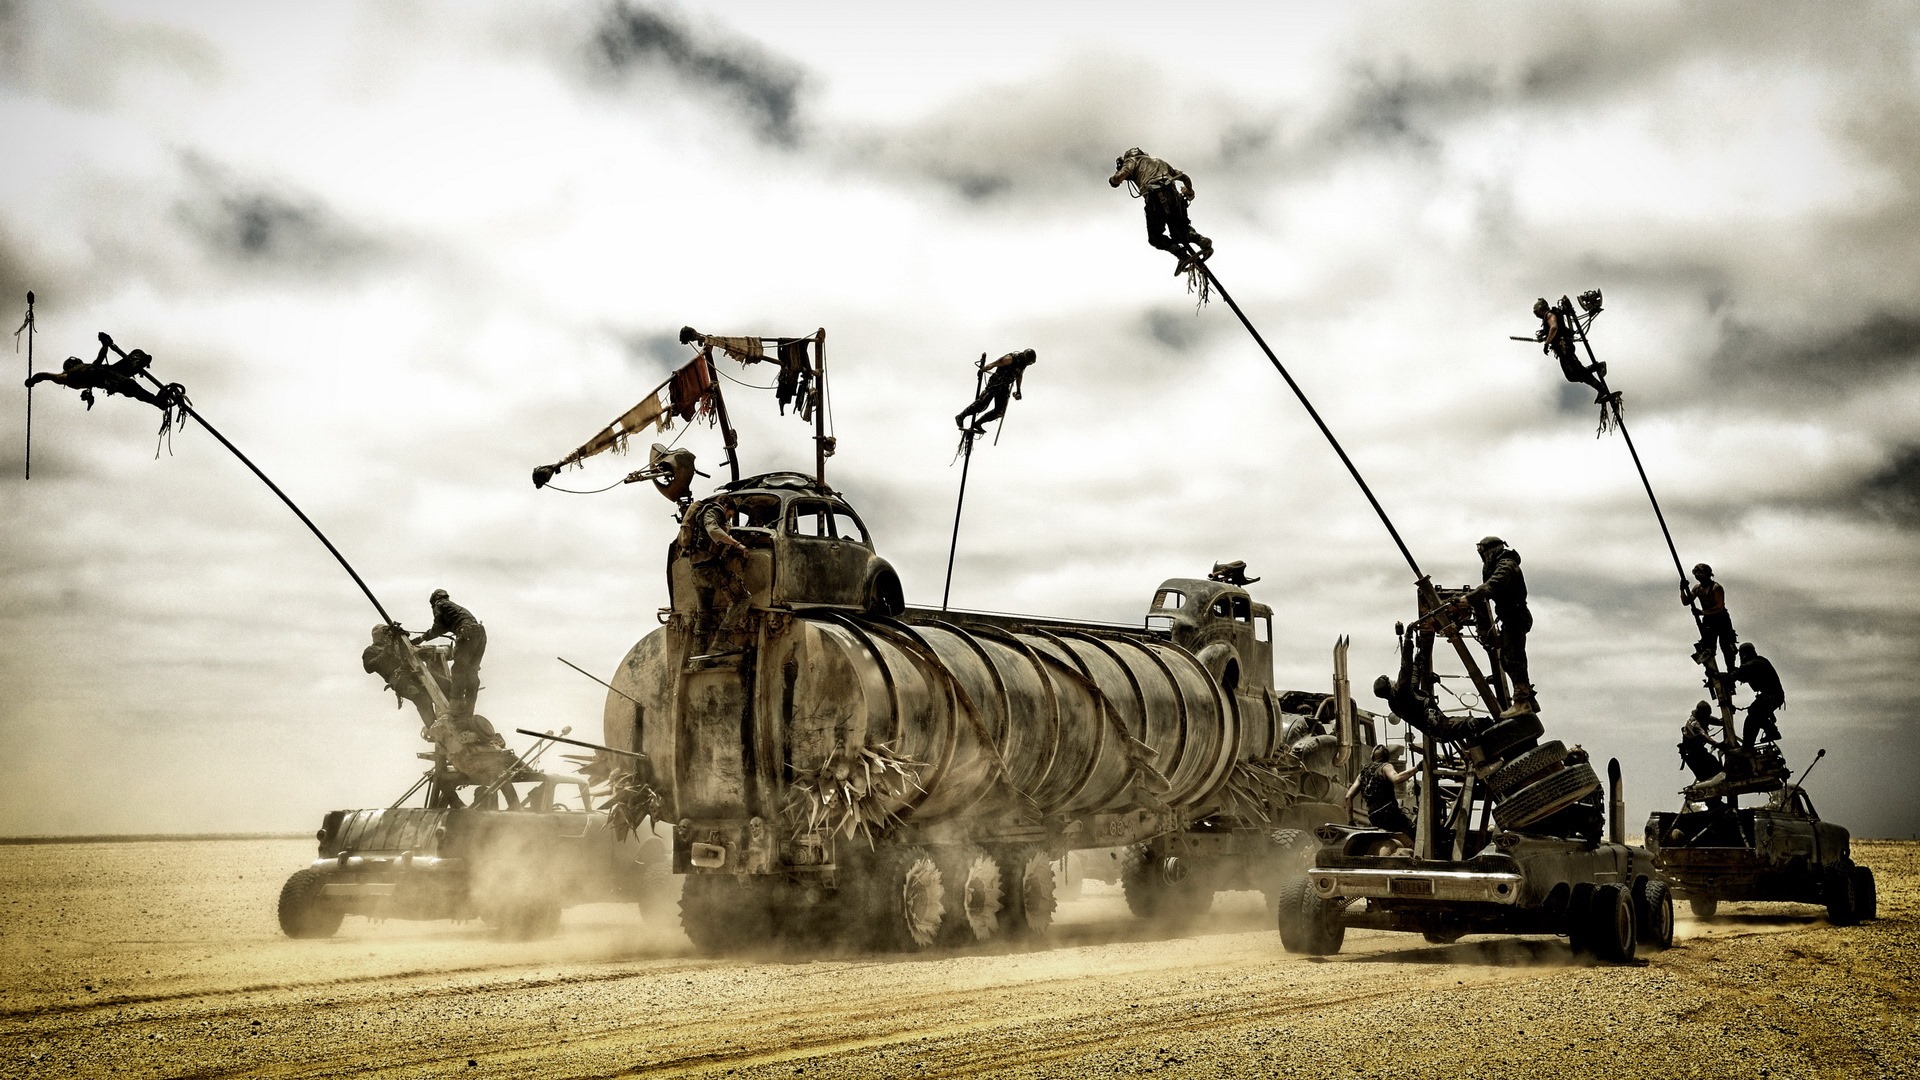 Mad Max: Fury Road, HD movie wallpapers #23 - 1920x1080